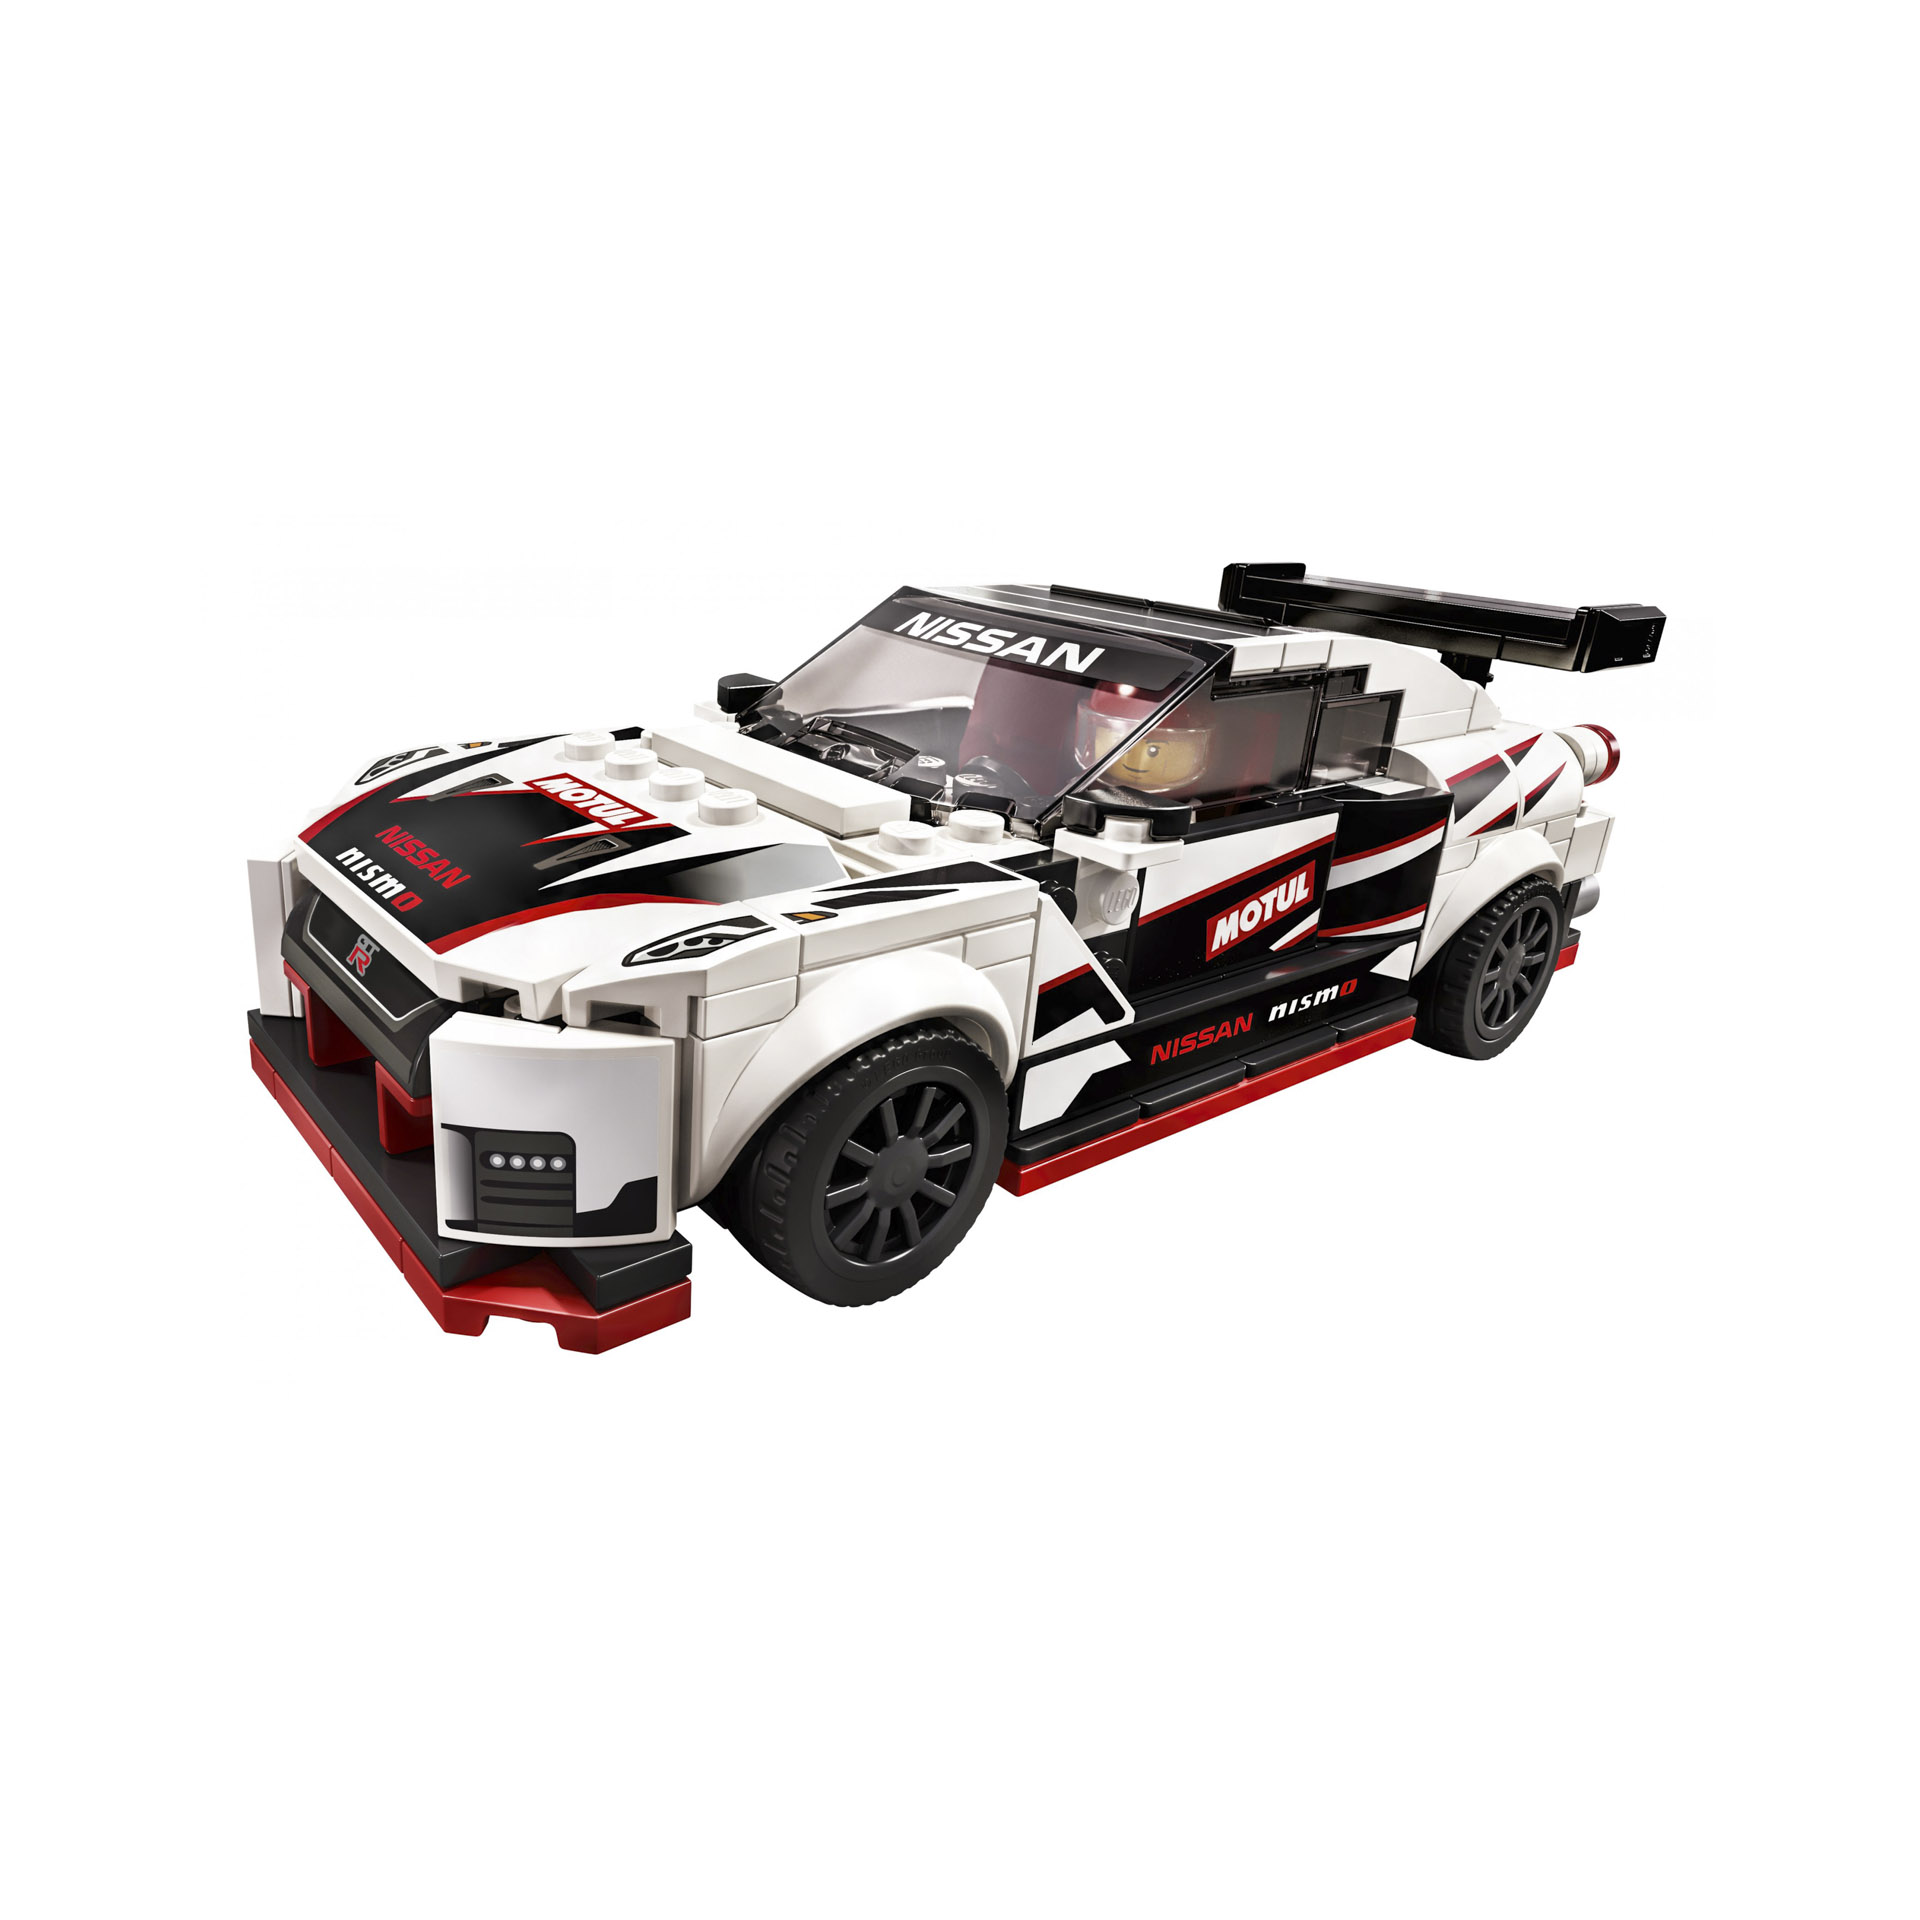 Nissan Gt-r Nismo 76896, , large